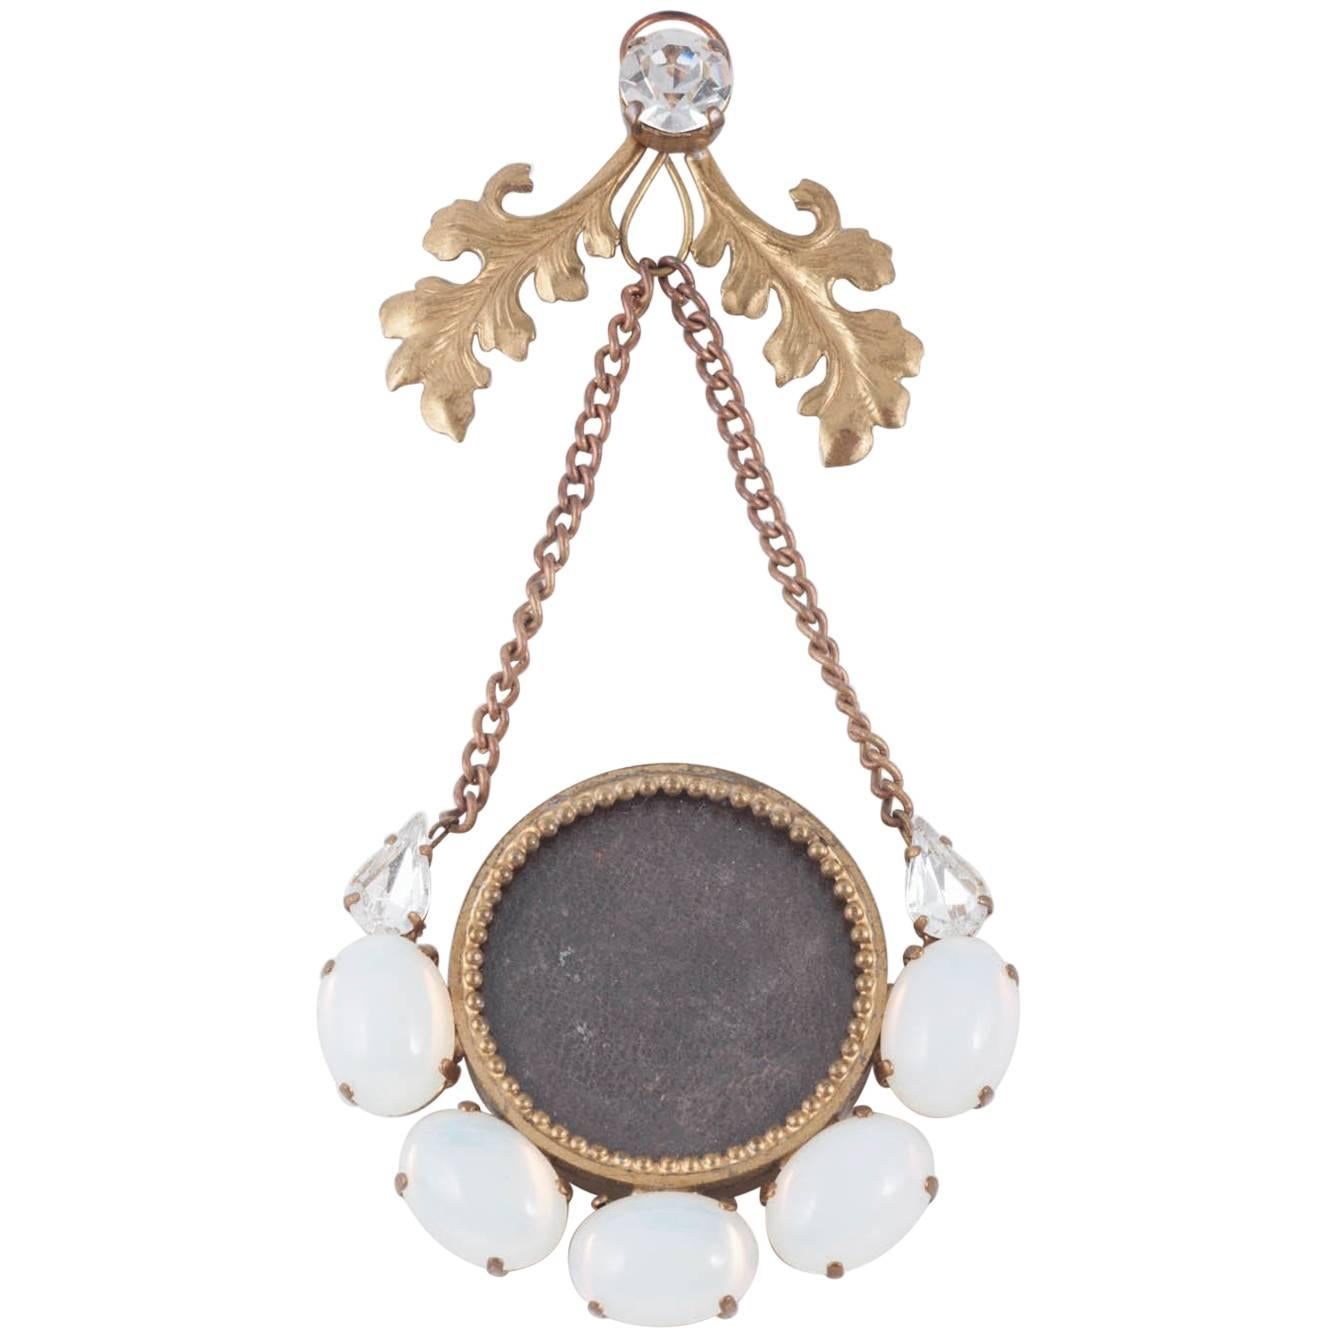 Victorian faux moonstone and brass hanging minature picture frame